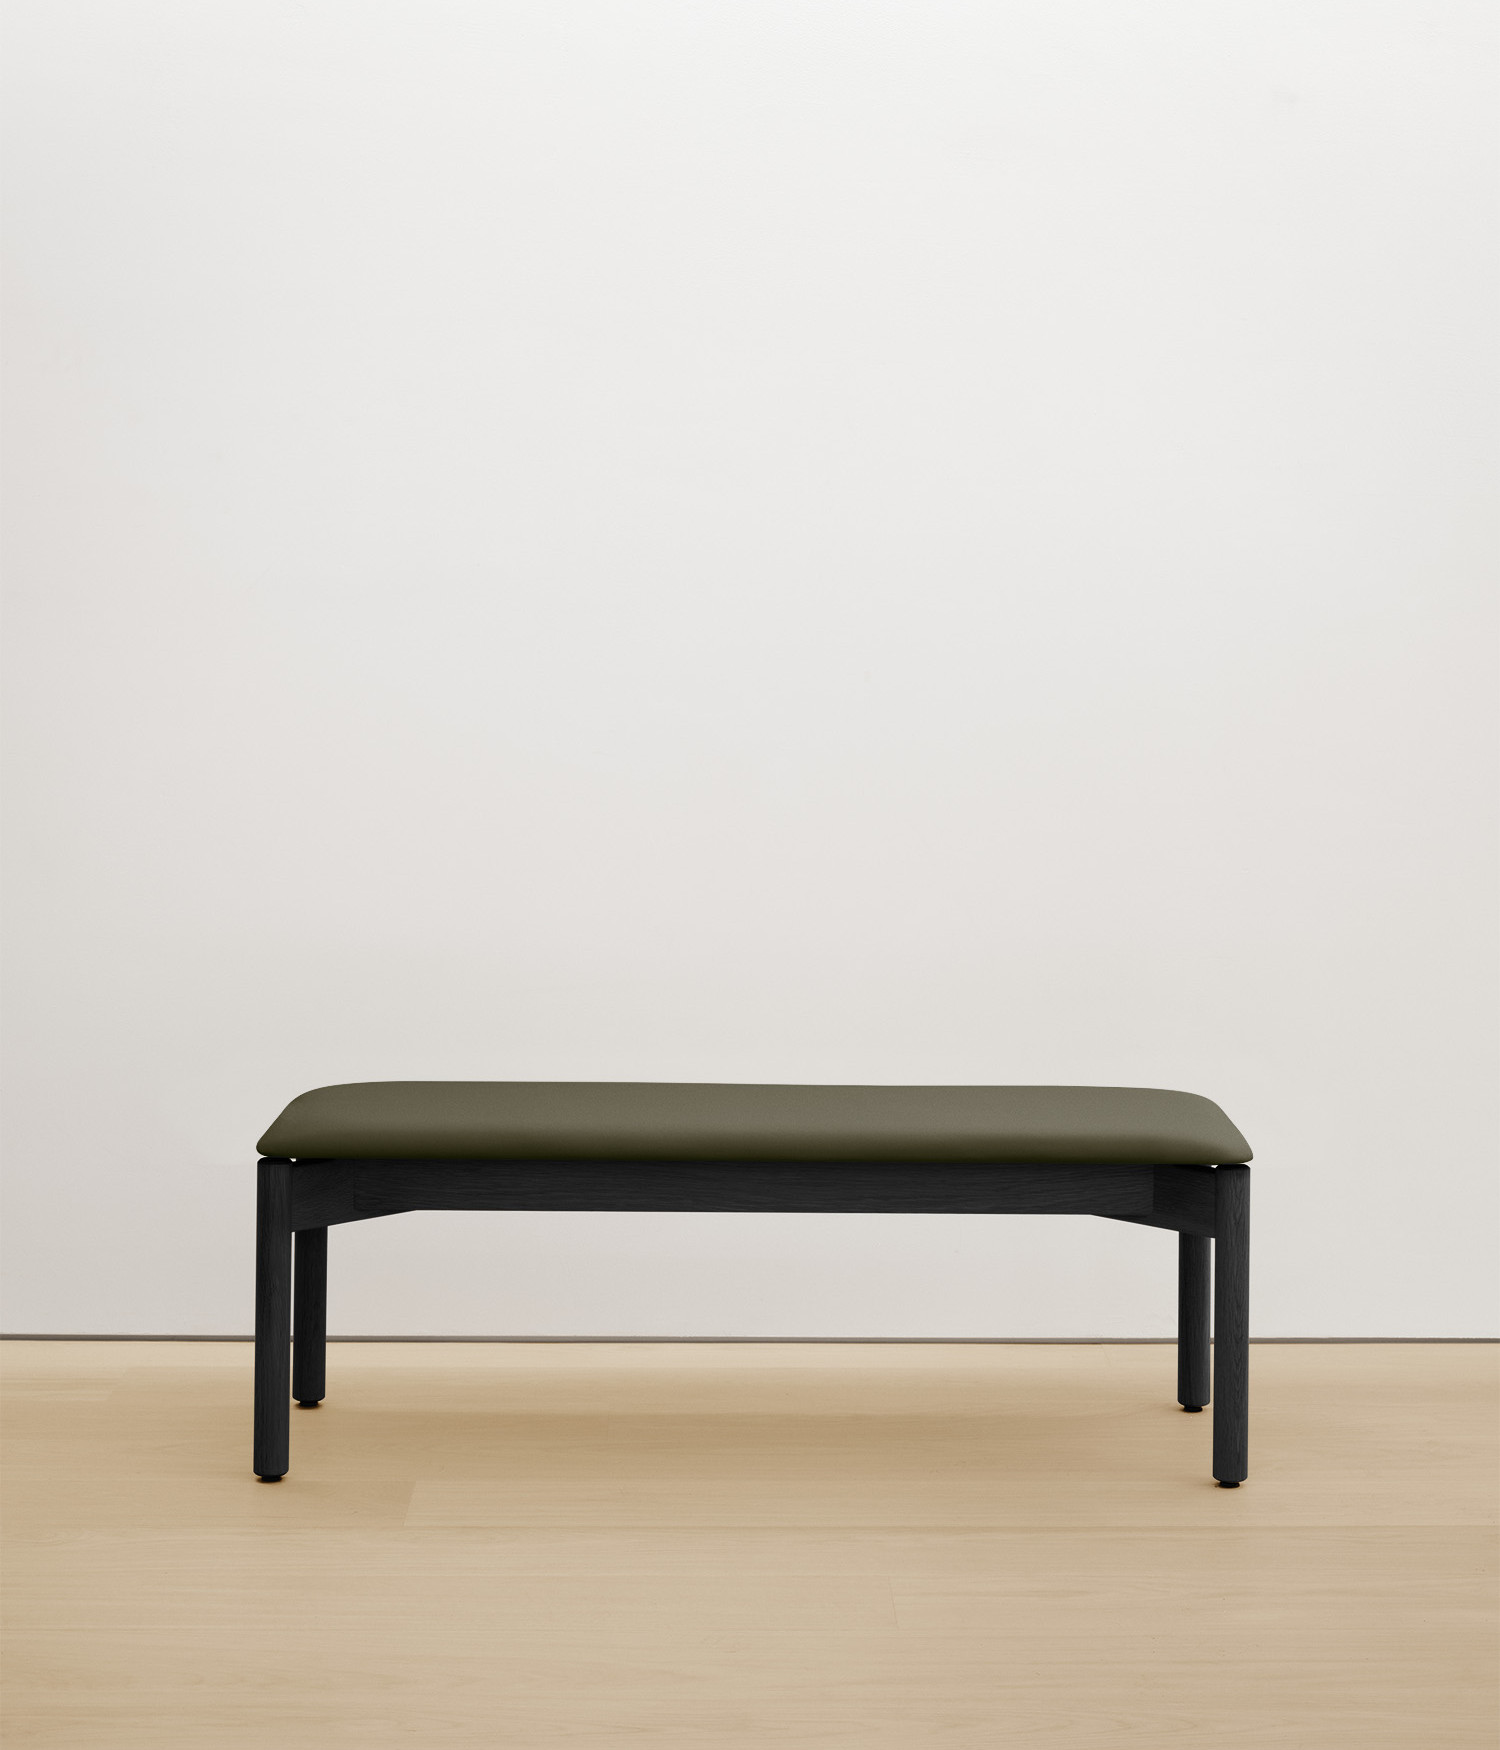  black-stained-oak bench with forest color upholstered seat